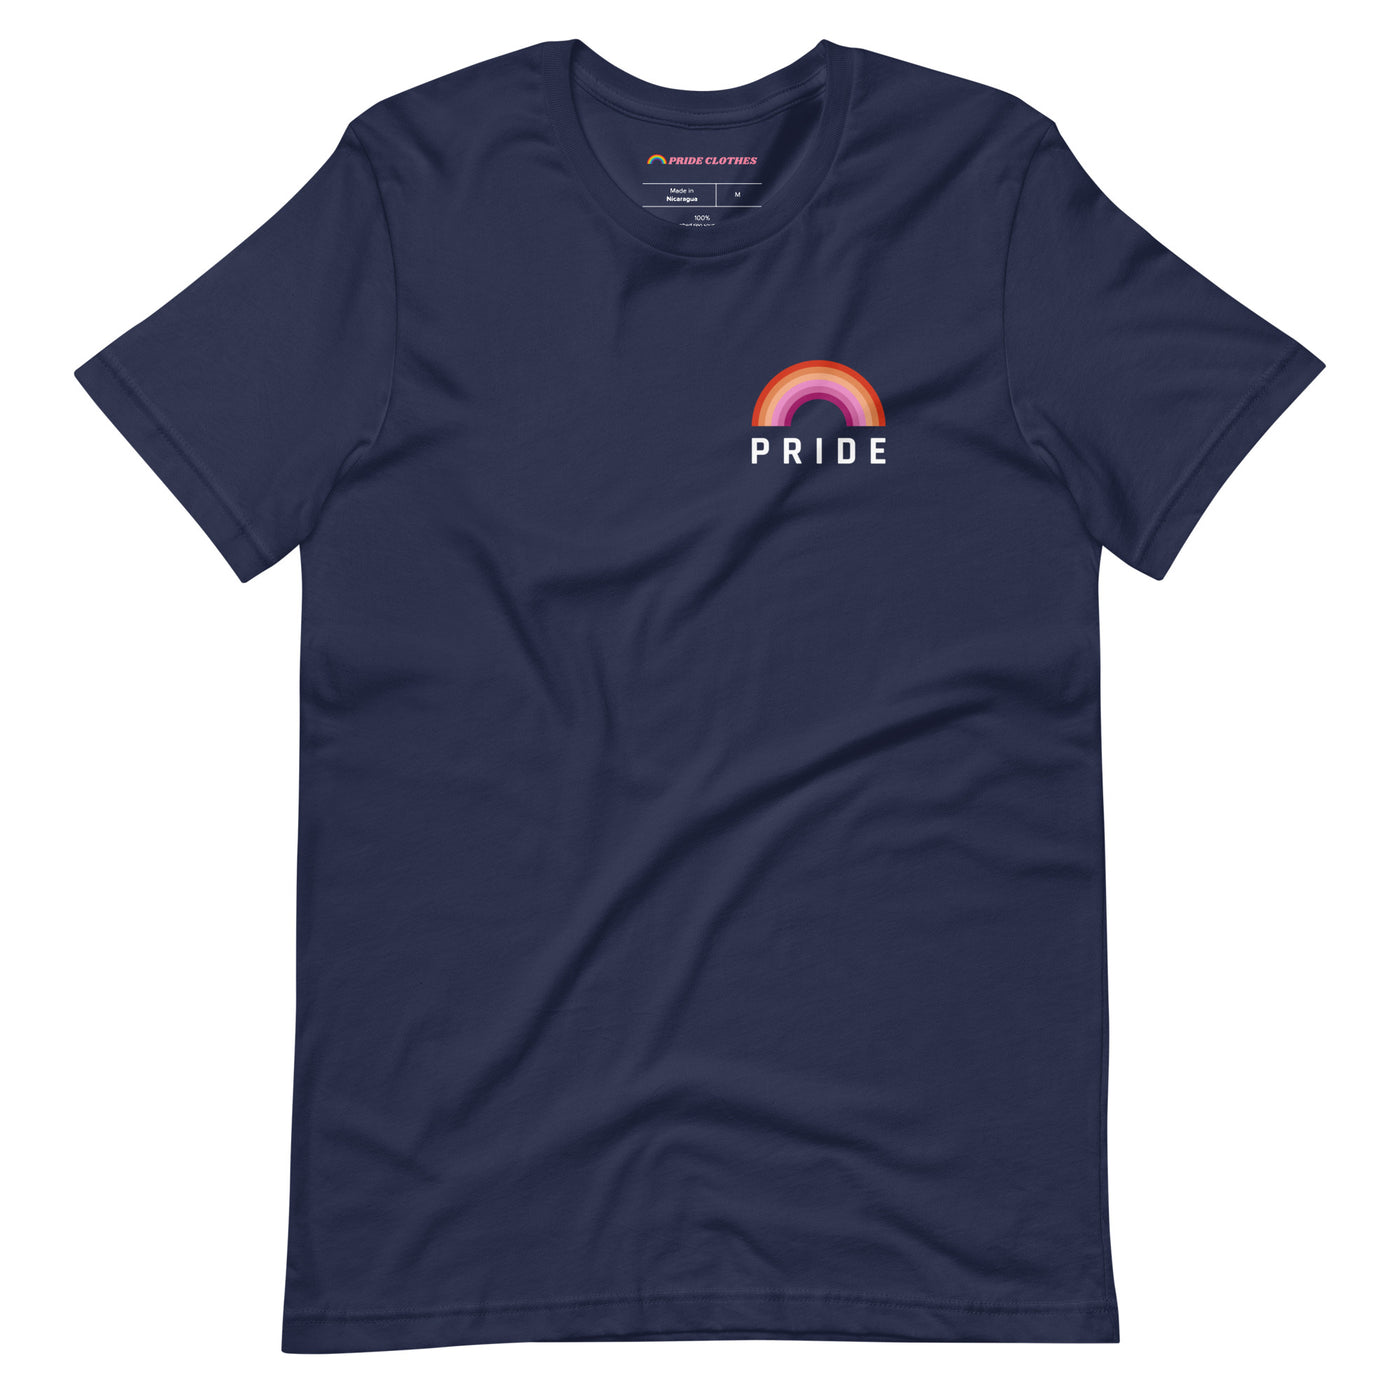 Pride Clothes - Potently Clear Lesbian Pride Rainbow TShirt - Navy